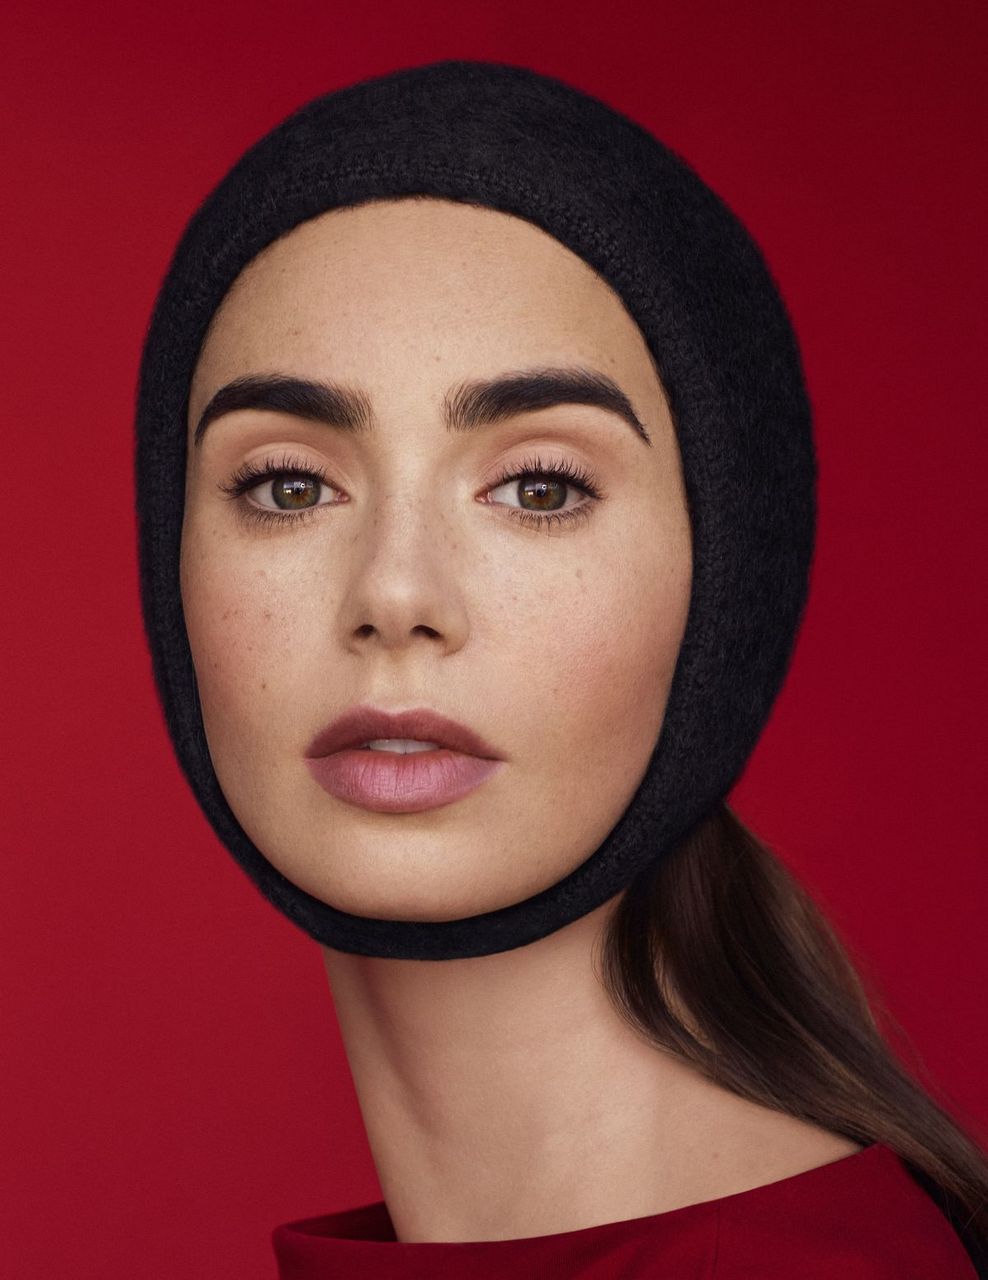 Lily Collins For El Pais January